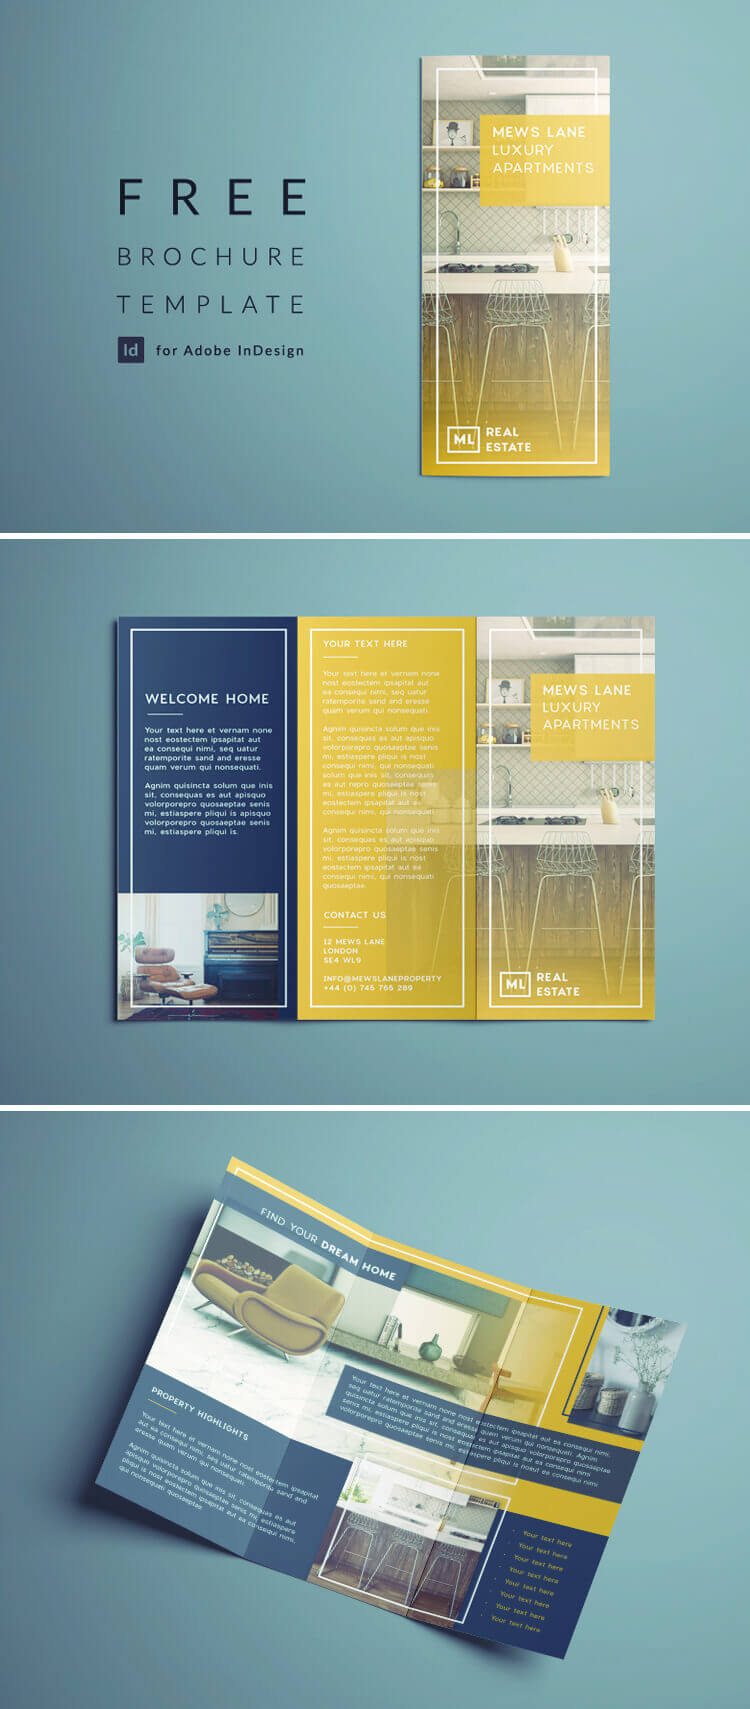 Tri Fold Brochure | Free Indesign Template For Adobe Tri Fold Brochure Template